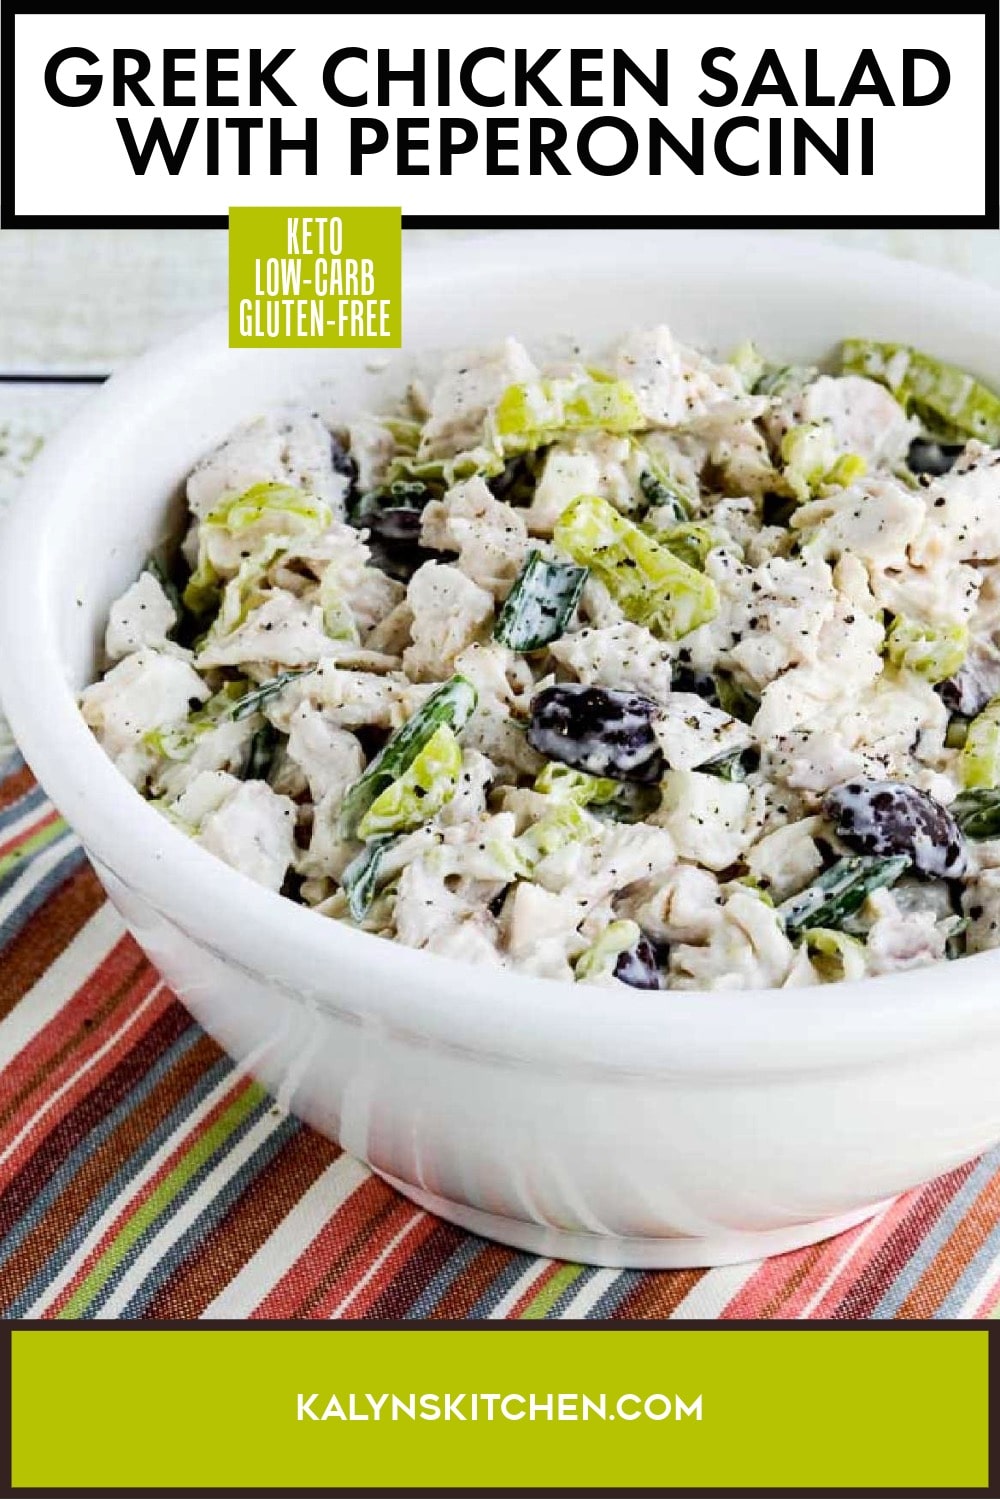 Pinterest image of Greek Chicken Salad with Peperoncini